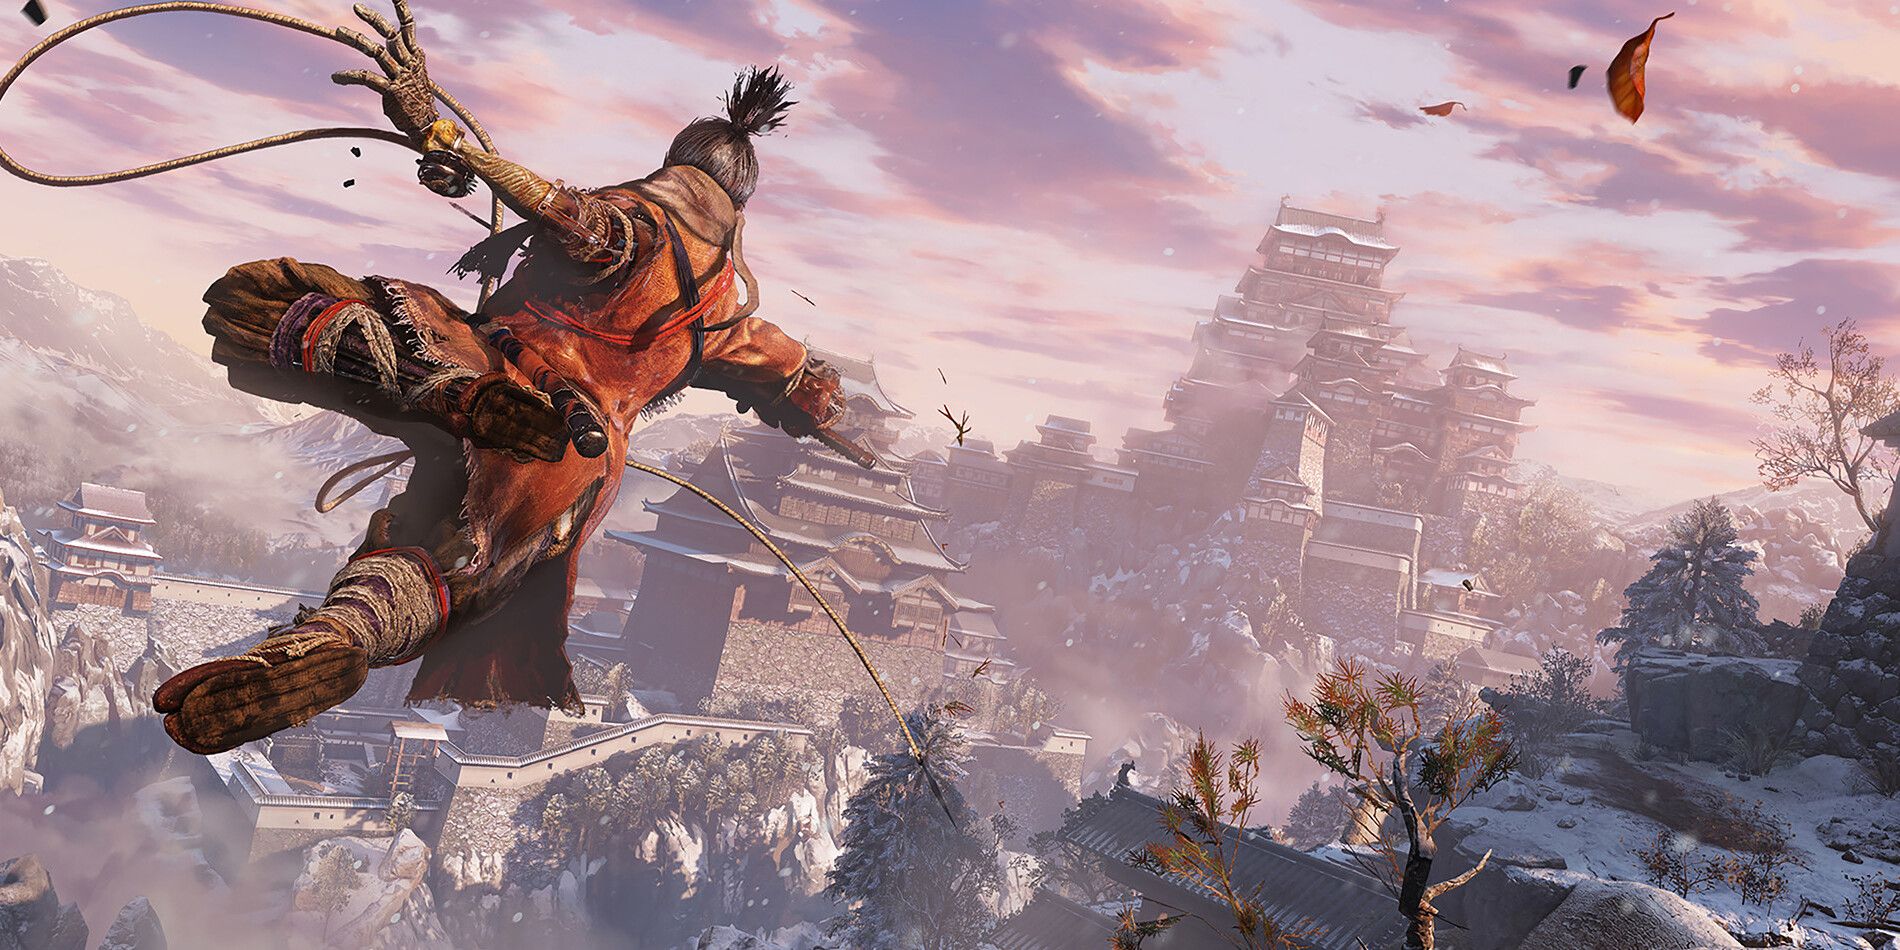 Wolf from Sekiro jumps across a frozen gap with a temple in the background